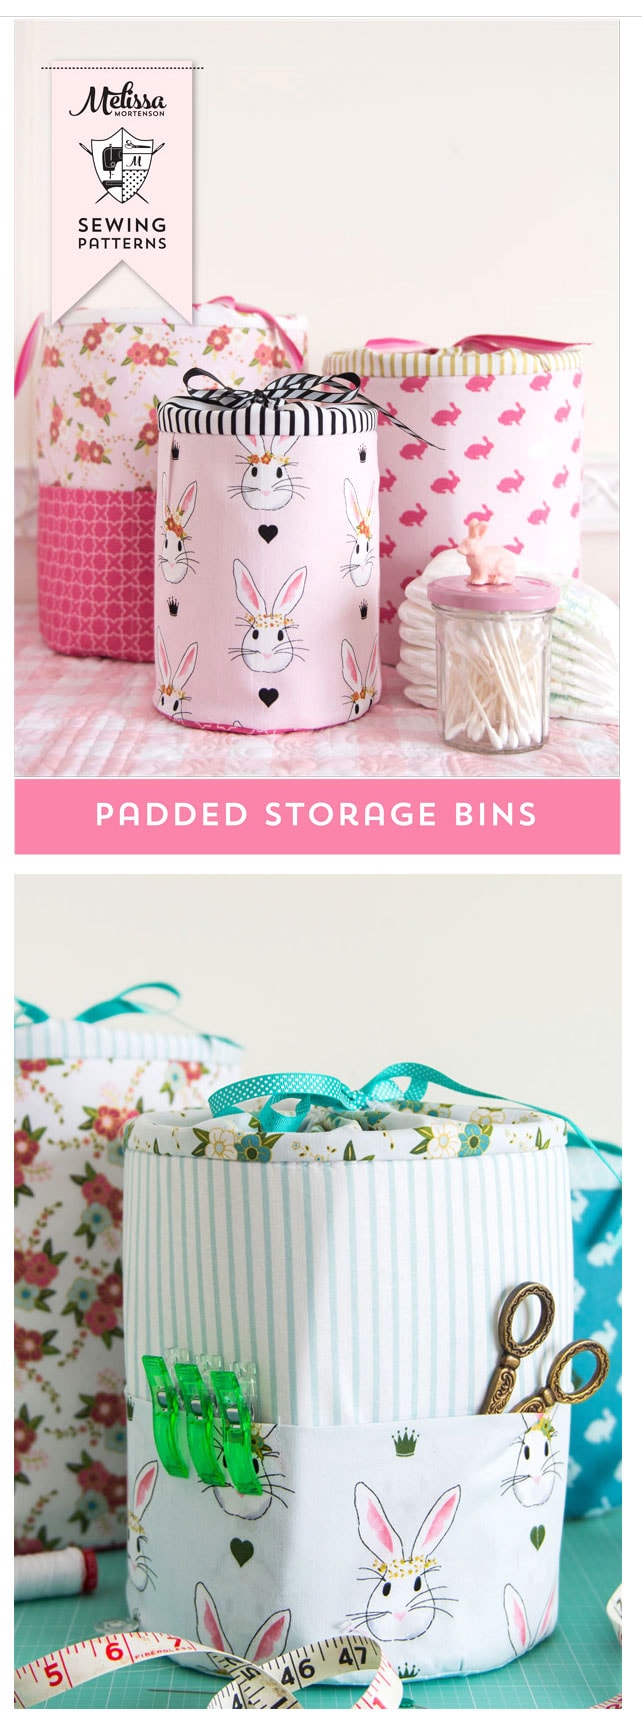 Sewing Pattern for Padded Storage Bins in 3 sizes. Make great and really cute storage for a nursery, kids room or craft room.